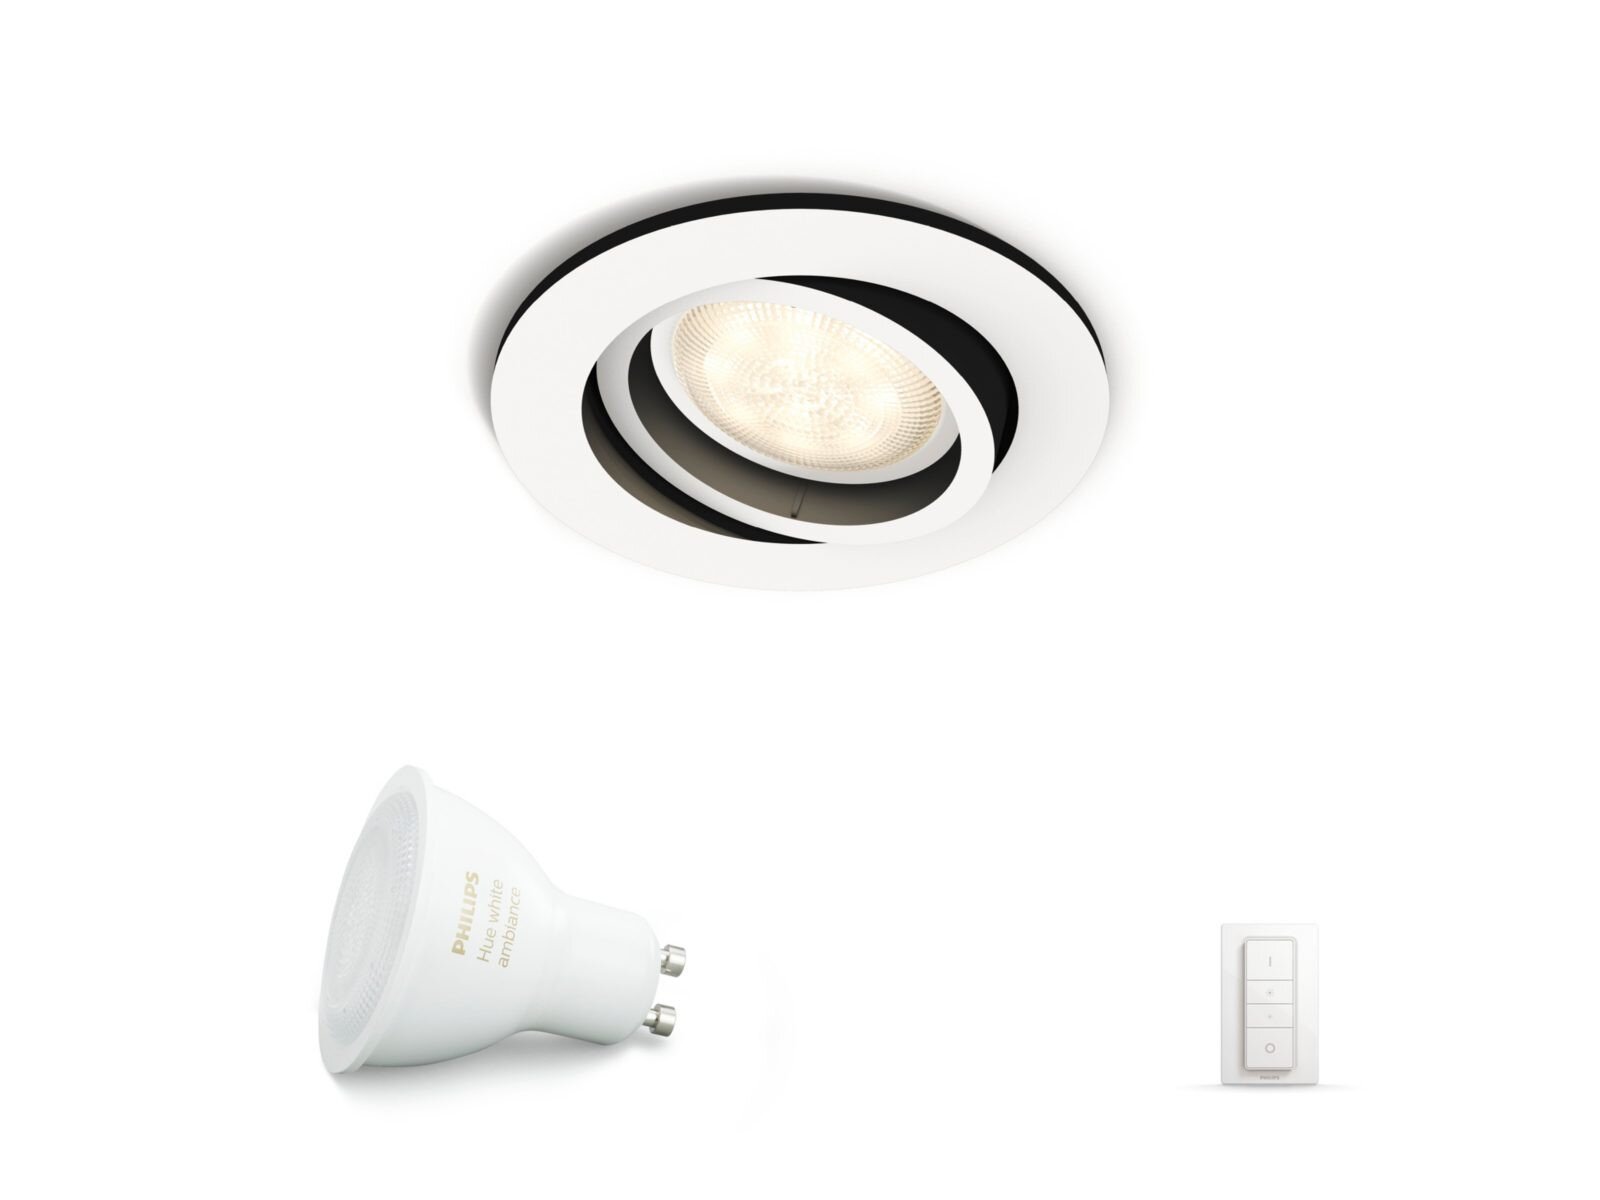 Buy Philips Hue Milliskin Recessed Light dimmable LED at